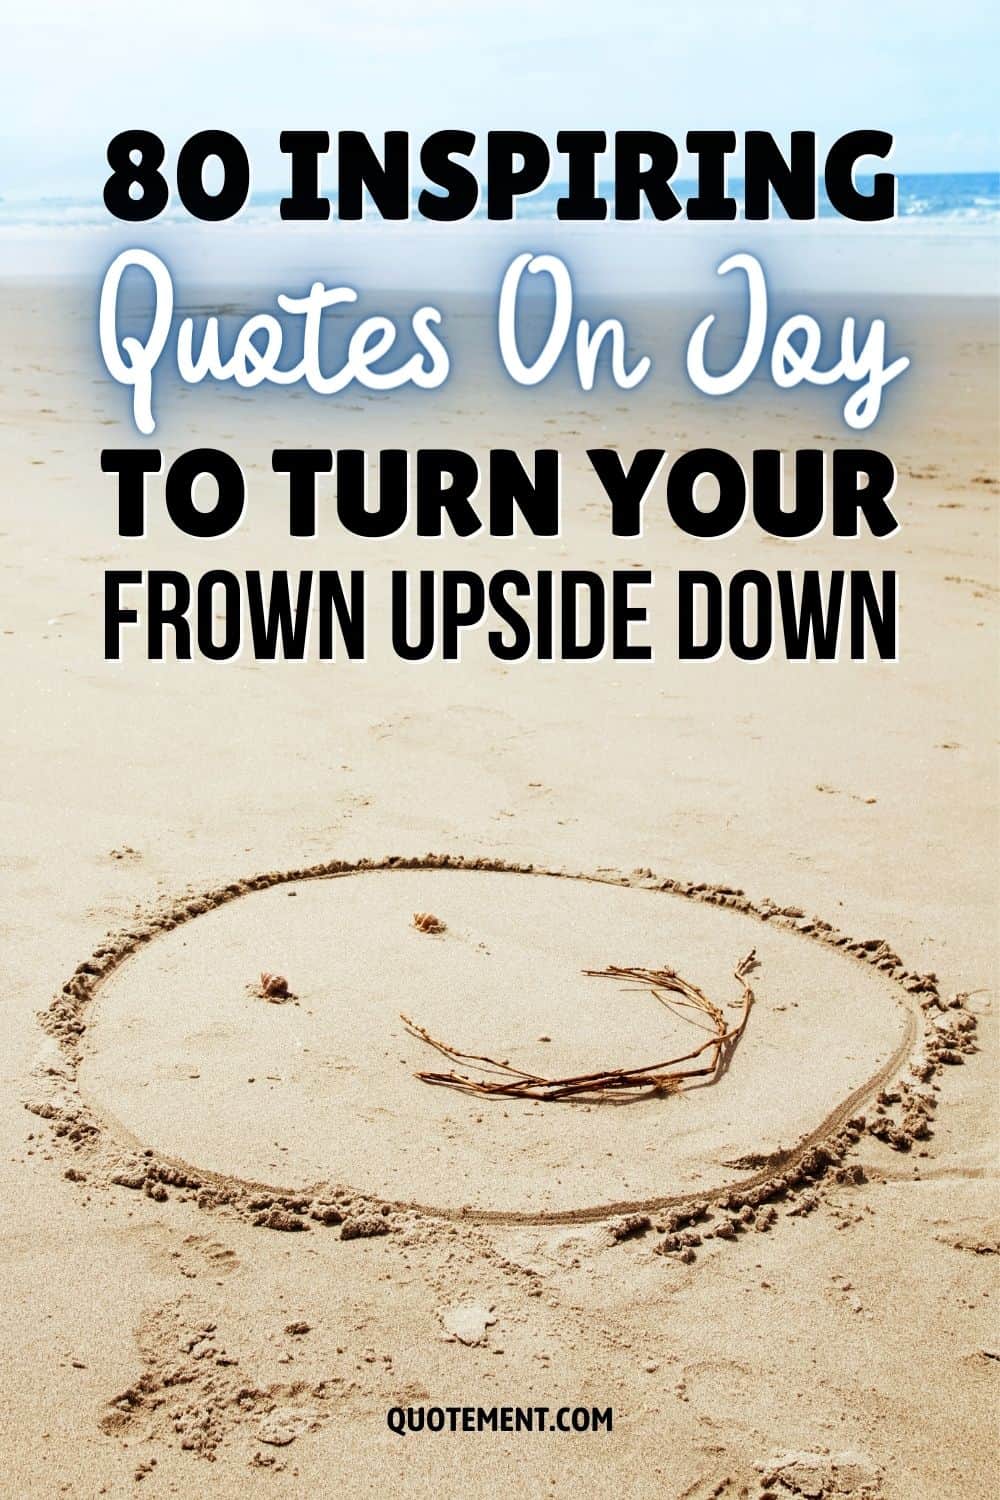 80 Inspiring Quotes On Joy To Turn Your Frown Upside Down 